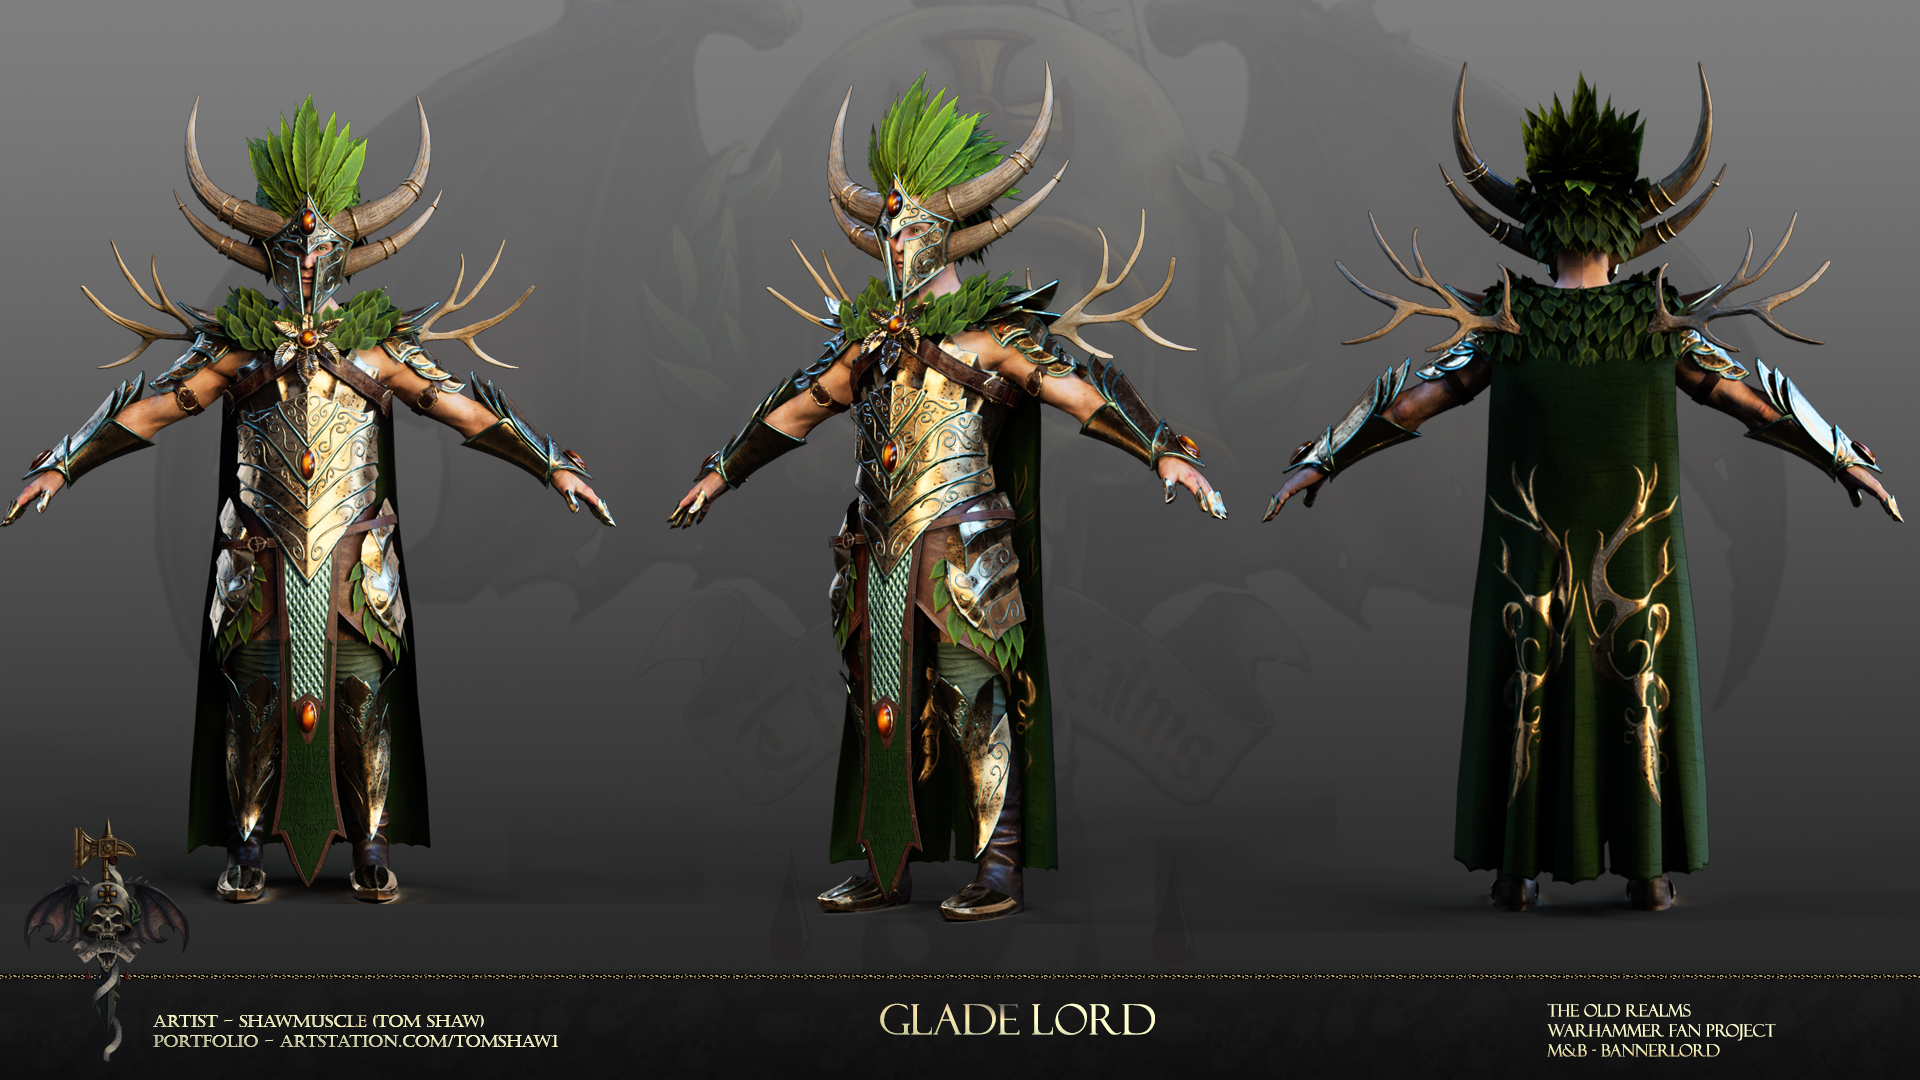 Glade lord